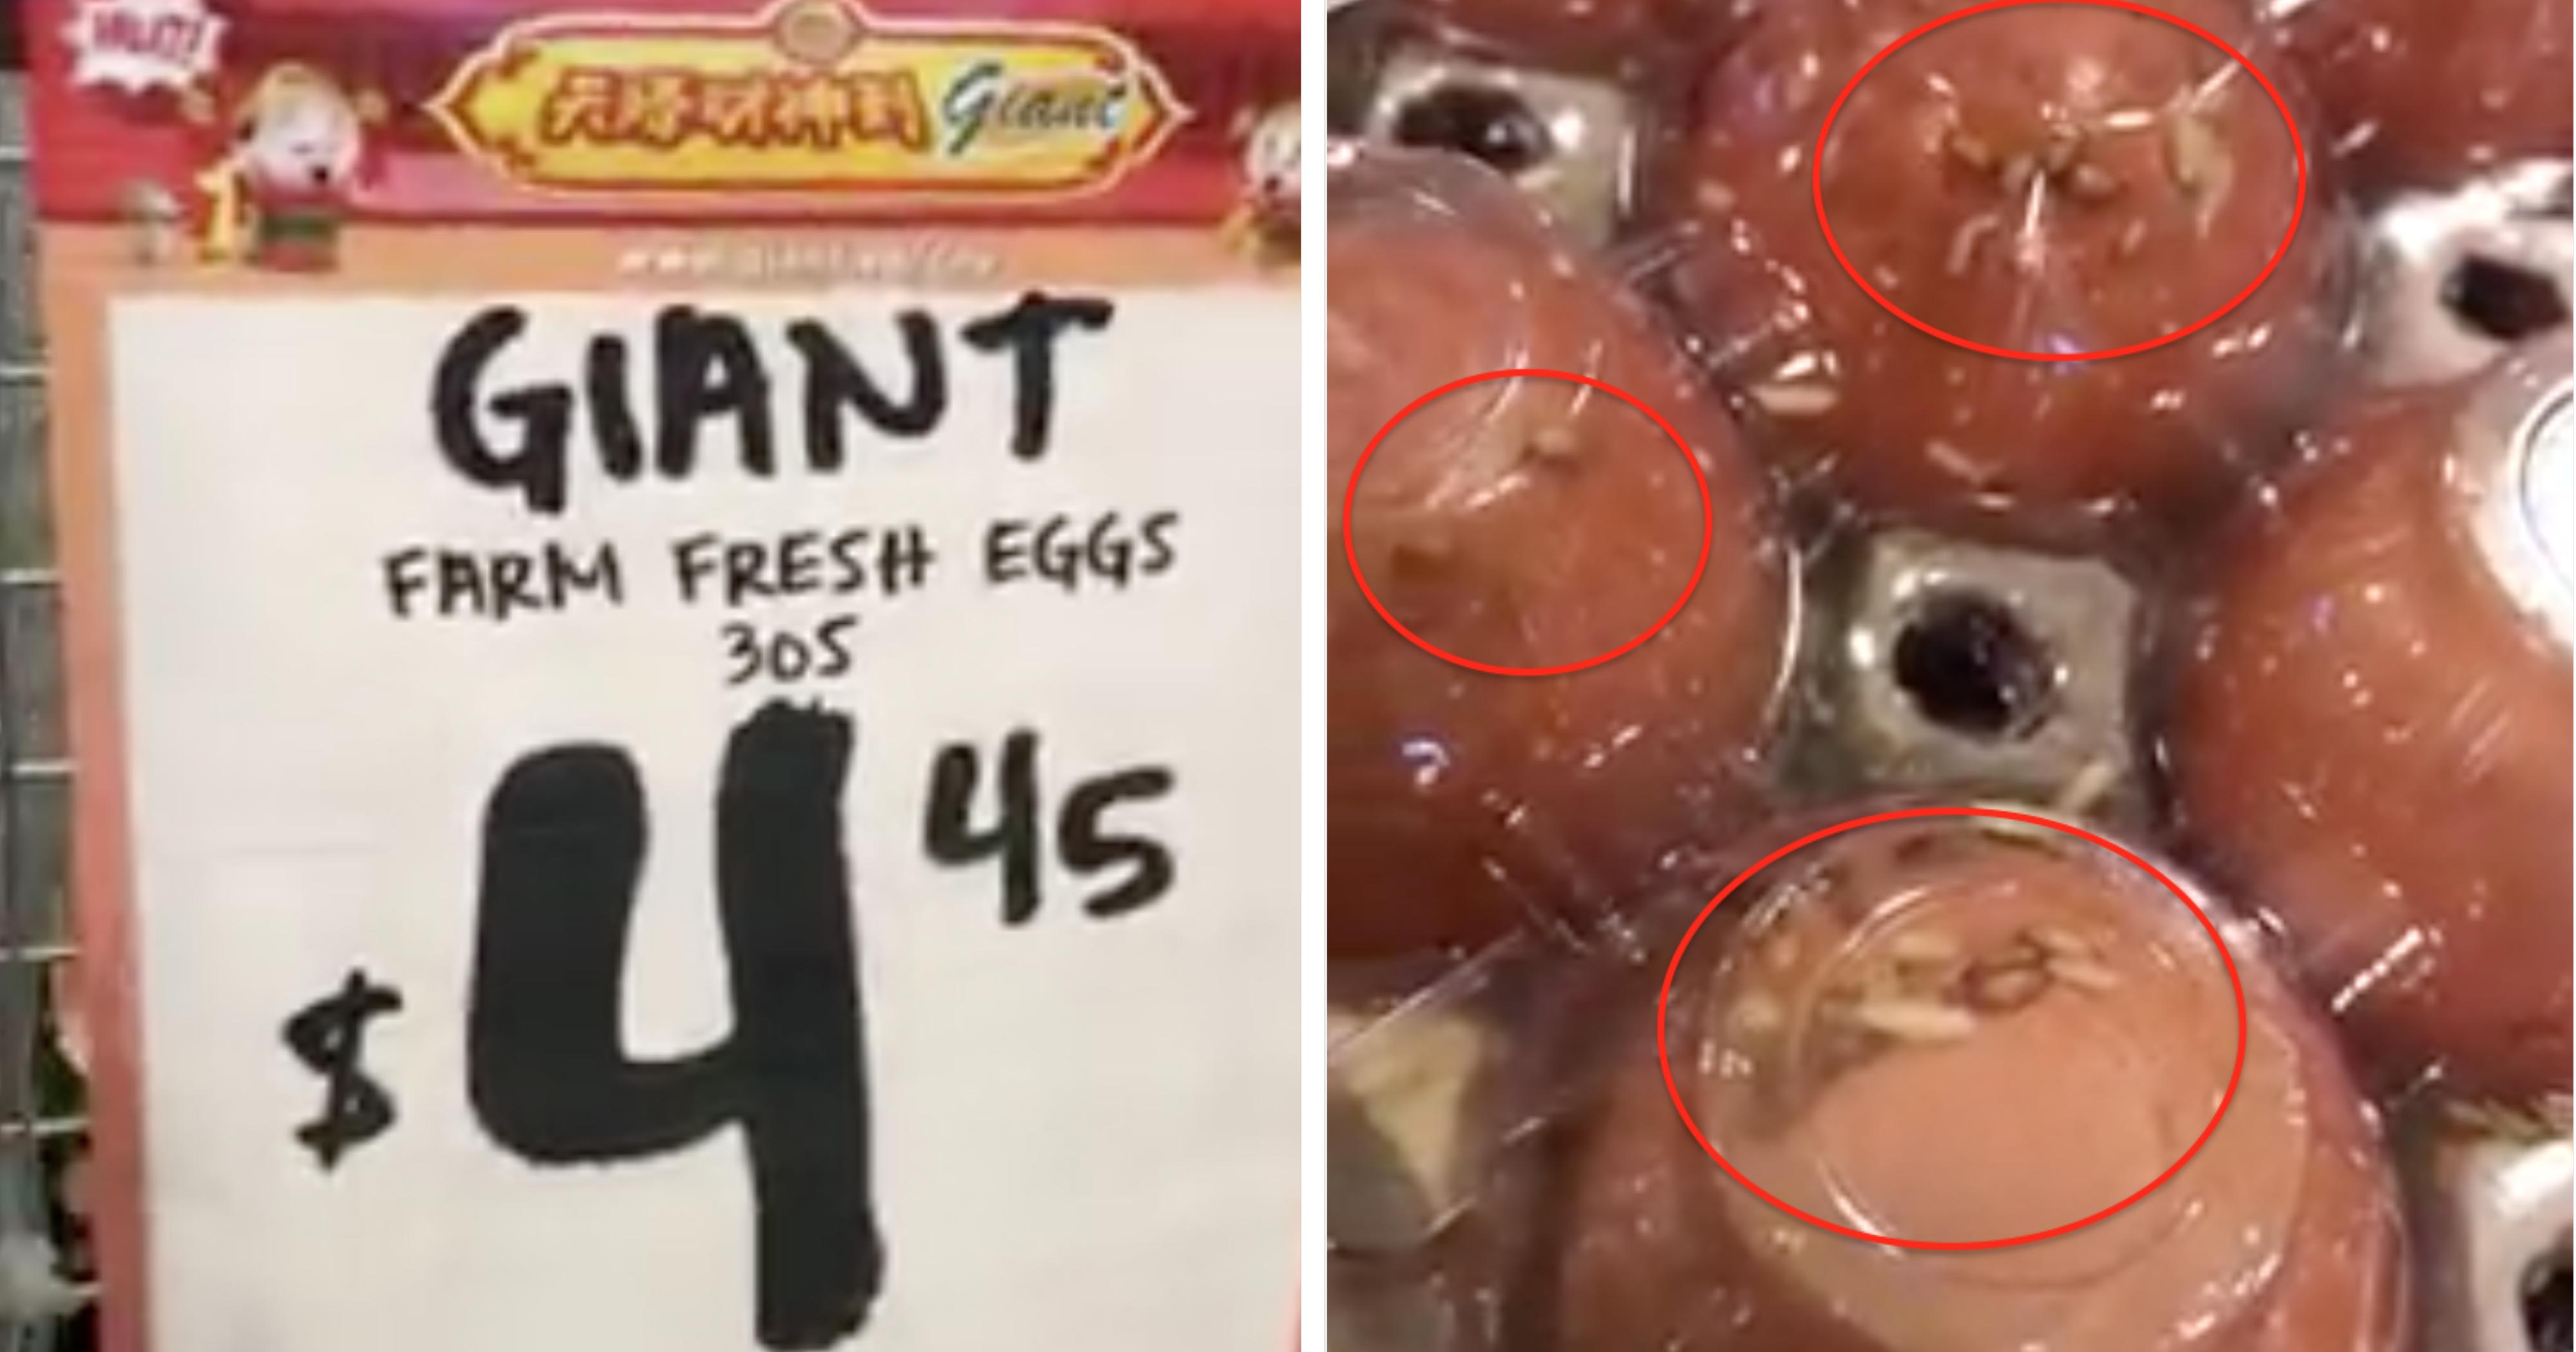 Tampines Giant hypermart eggs covered in wriggling maggots -   - News from Singapore, Asia and around the world